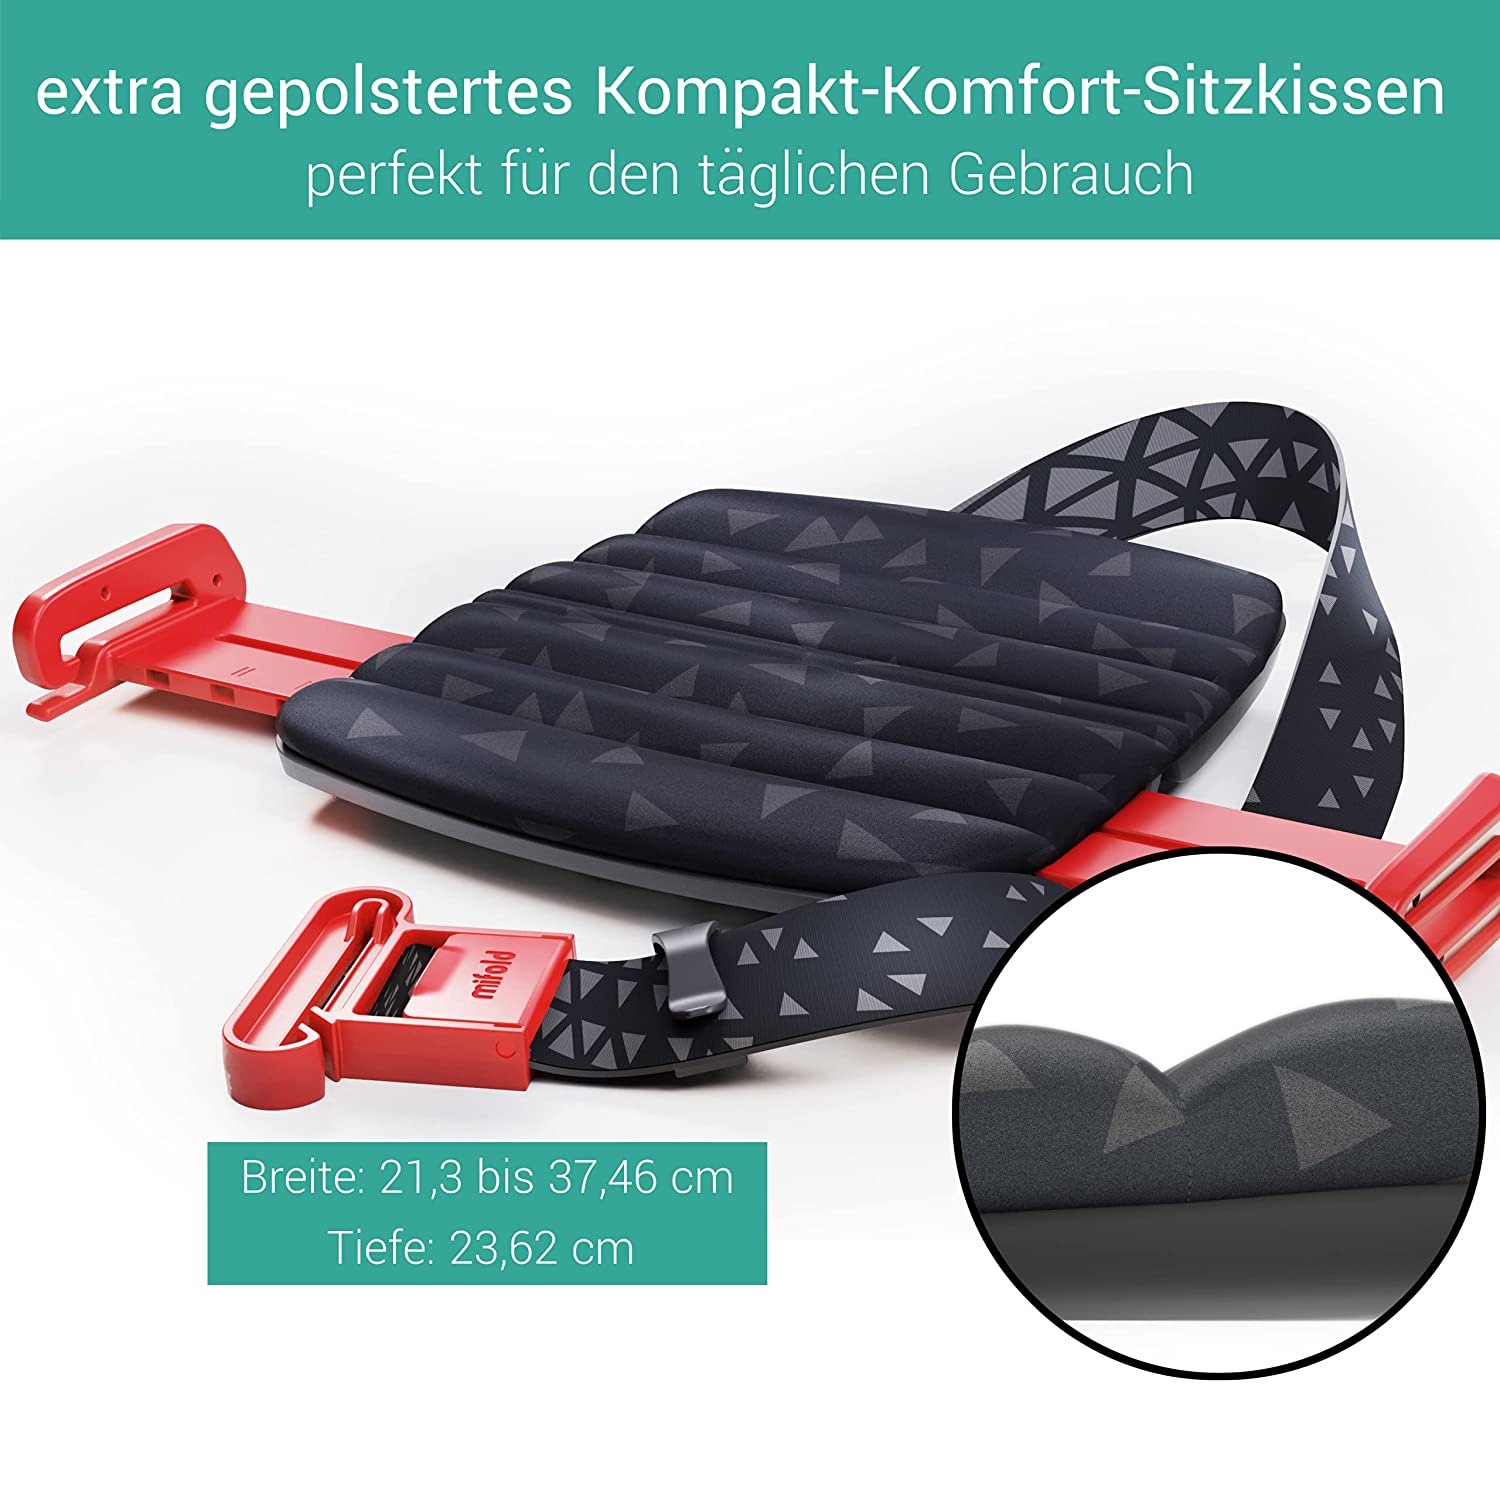 mifold Comfort: the mobile child seat, compact and portable for everyday use